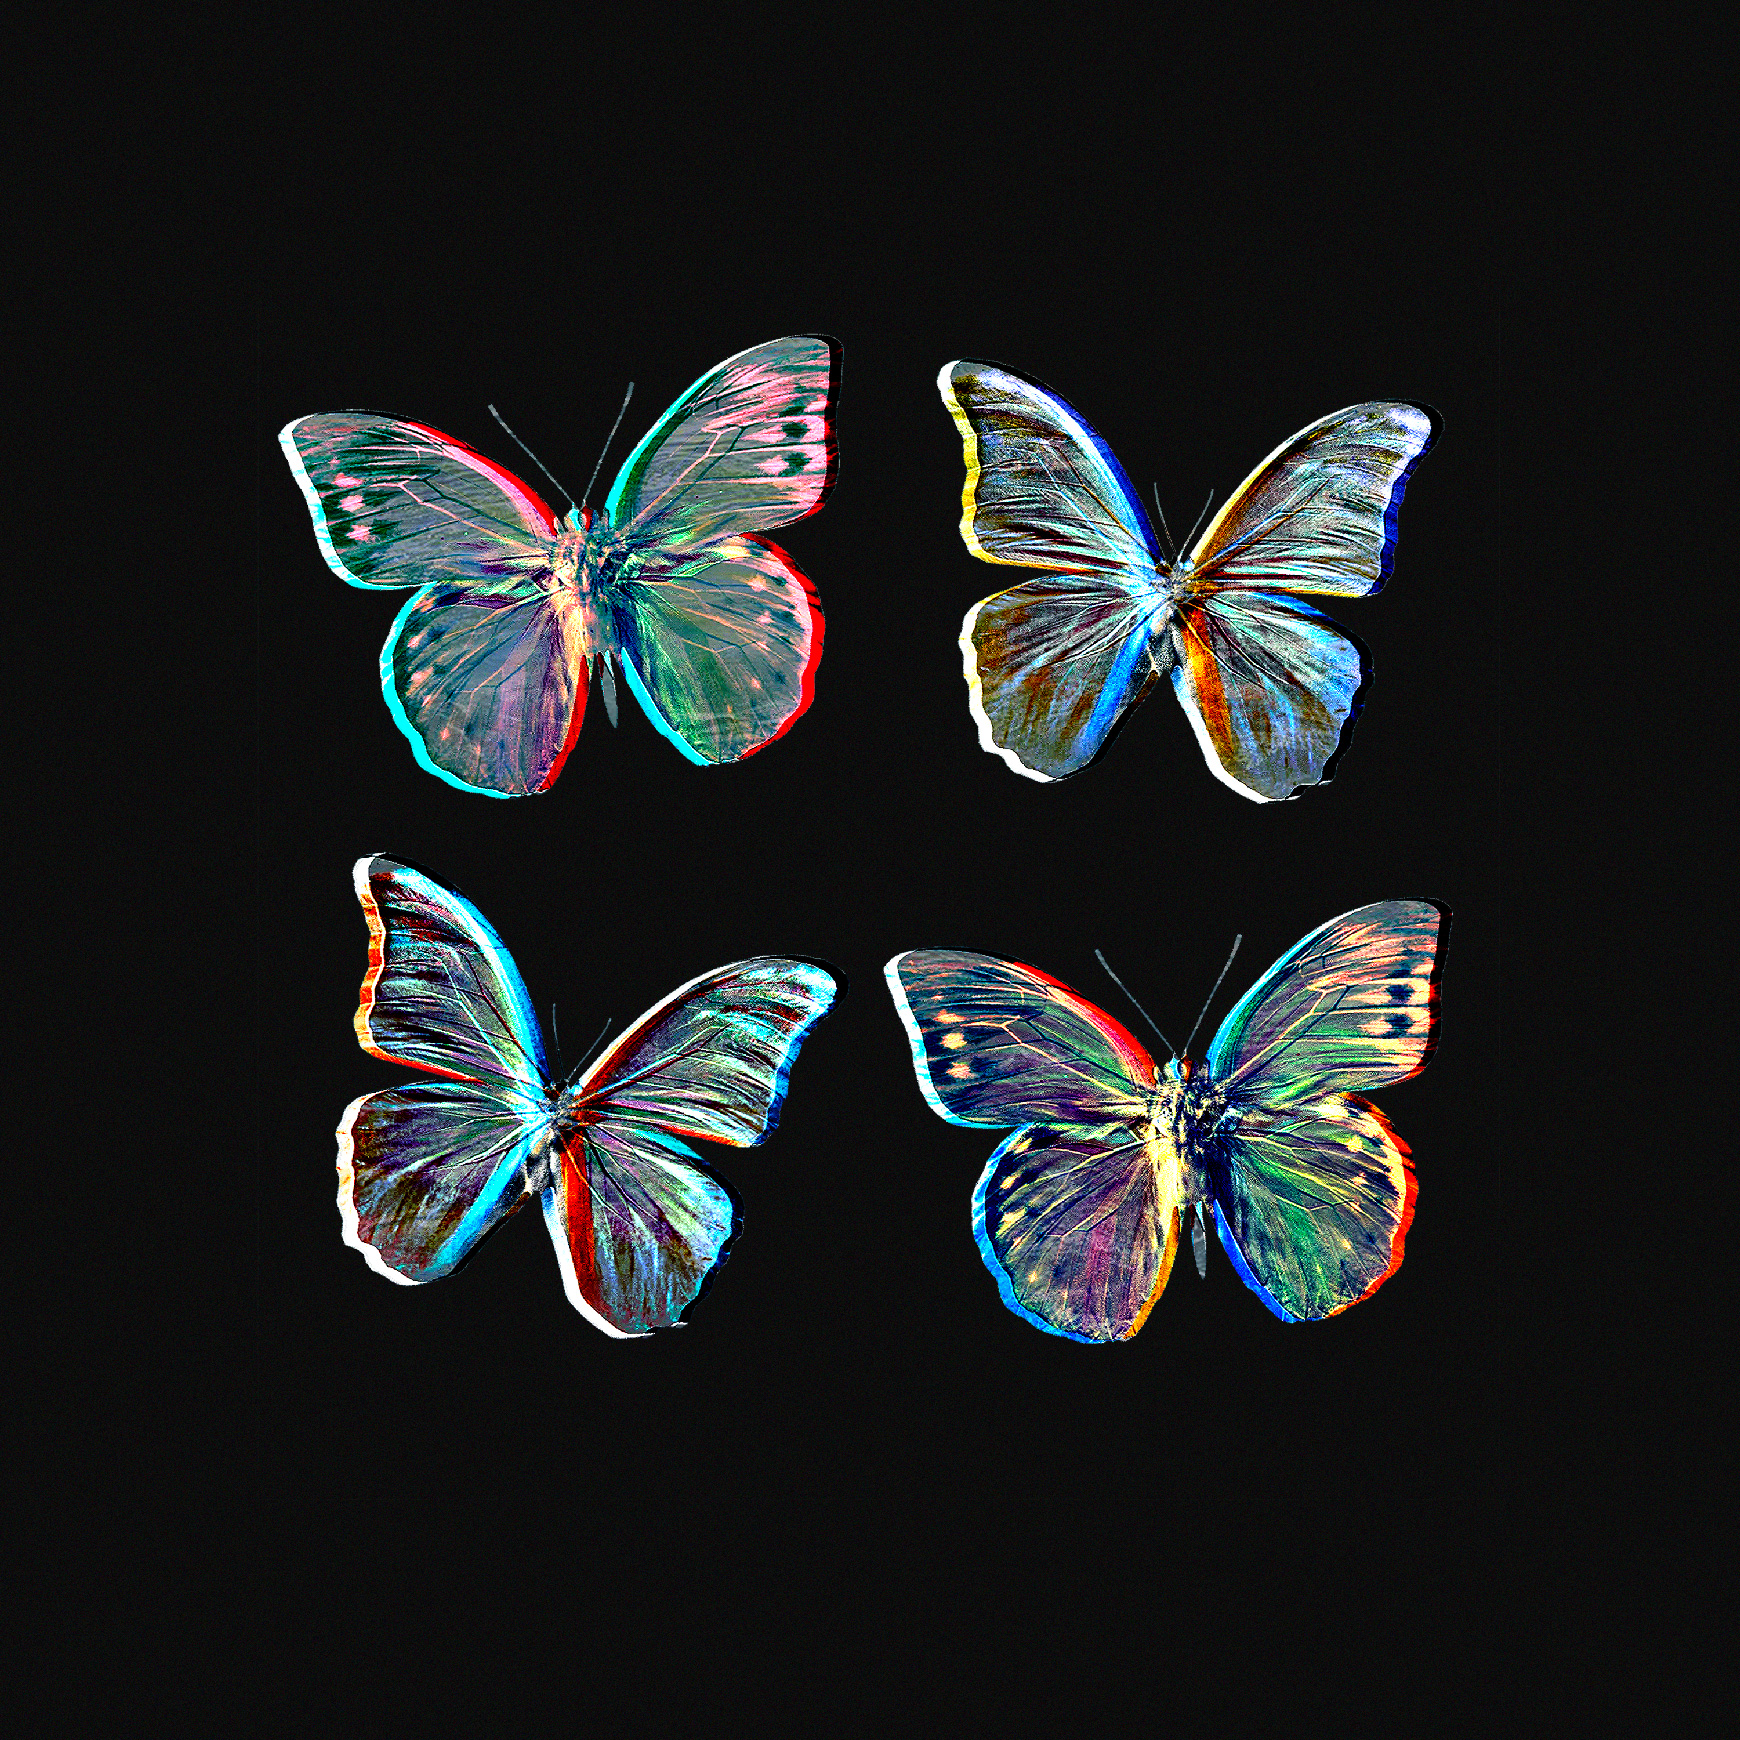 Extruded butterfly design. October 2019.